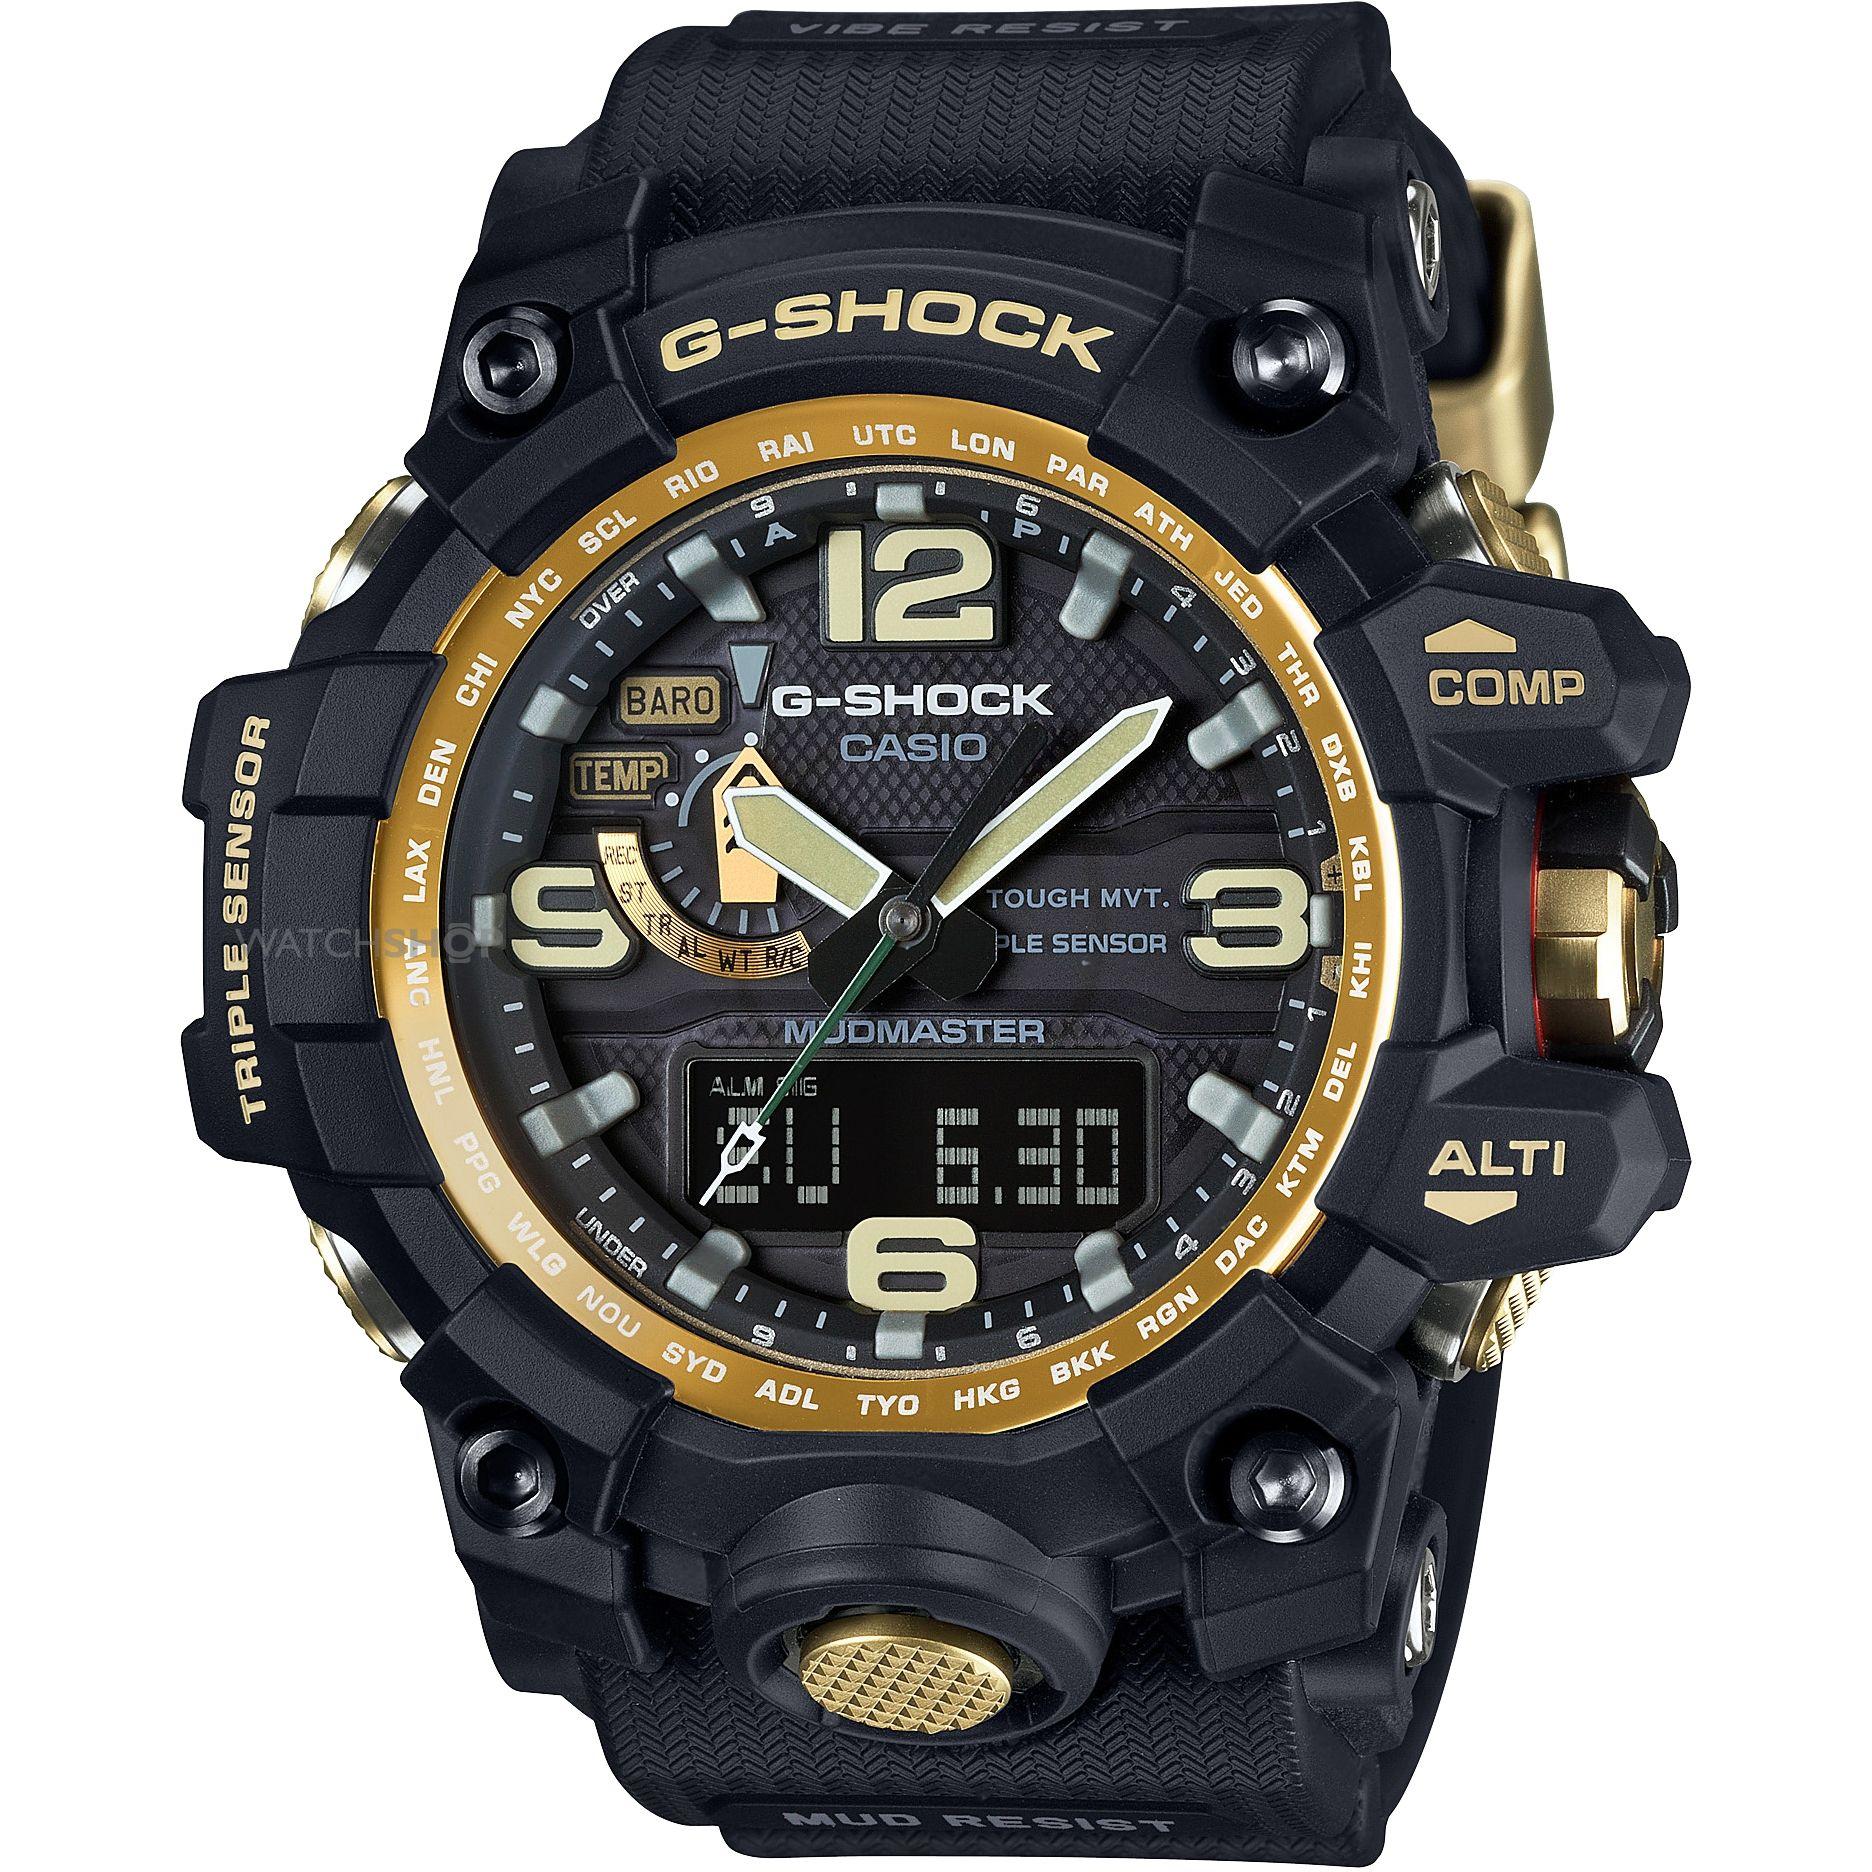 CASIO G SHOCK Photo, Image And Wallpaper